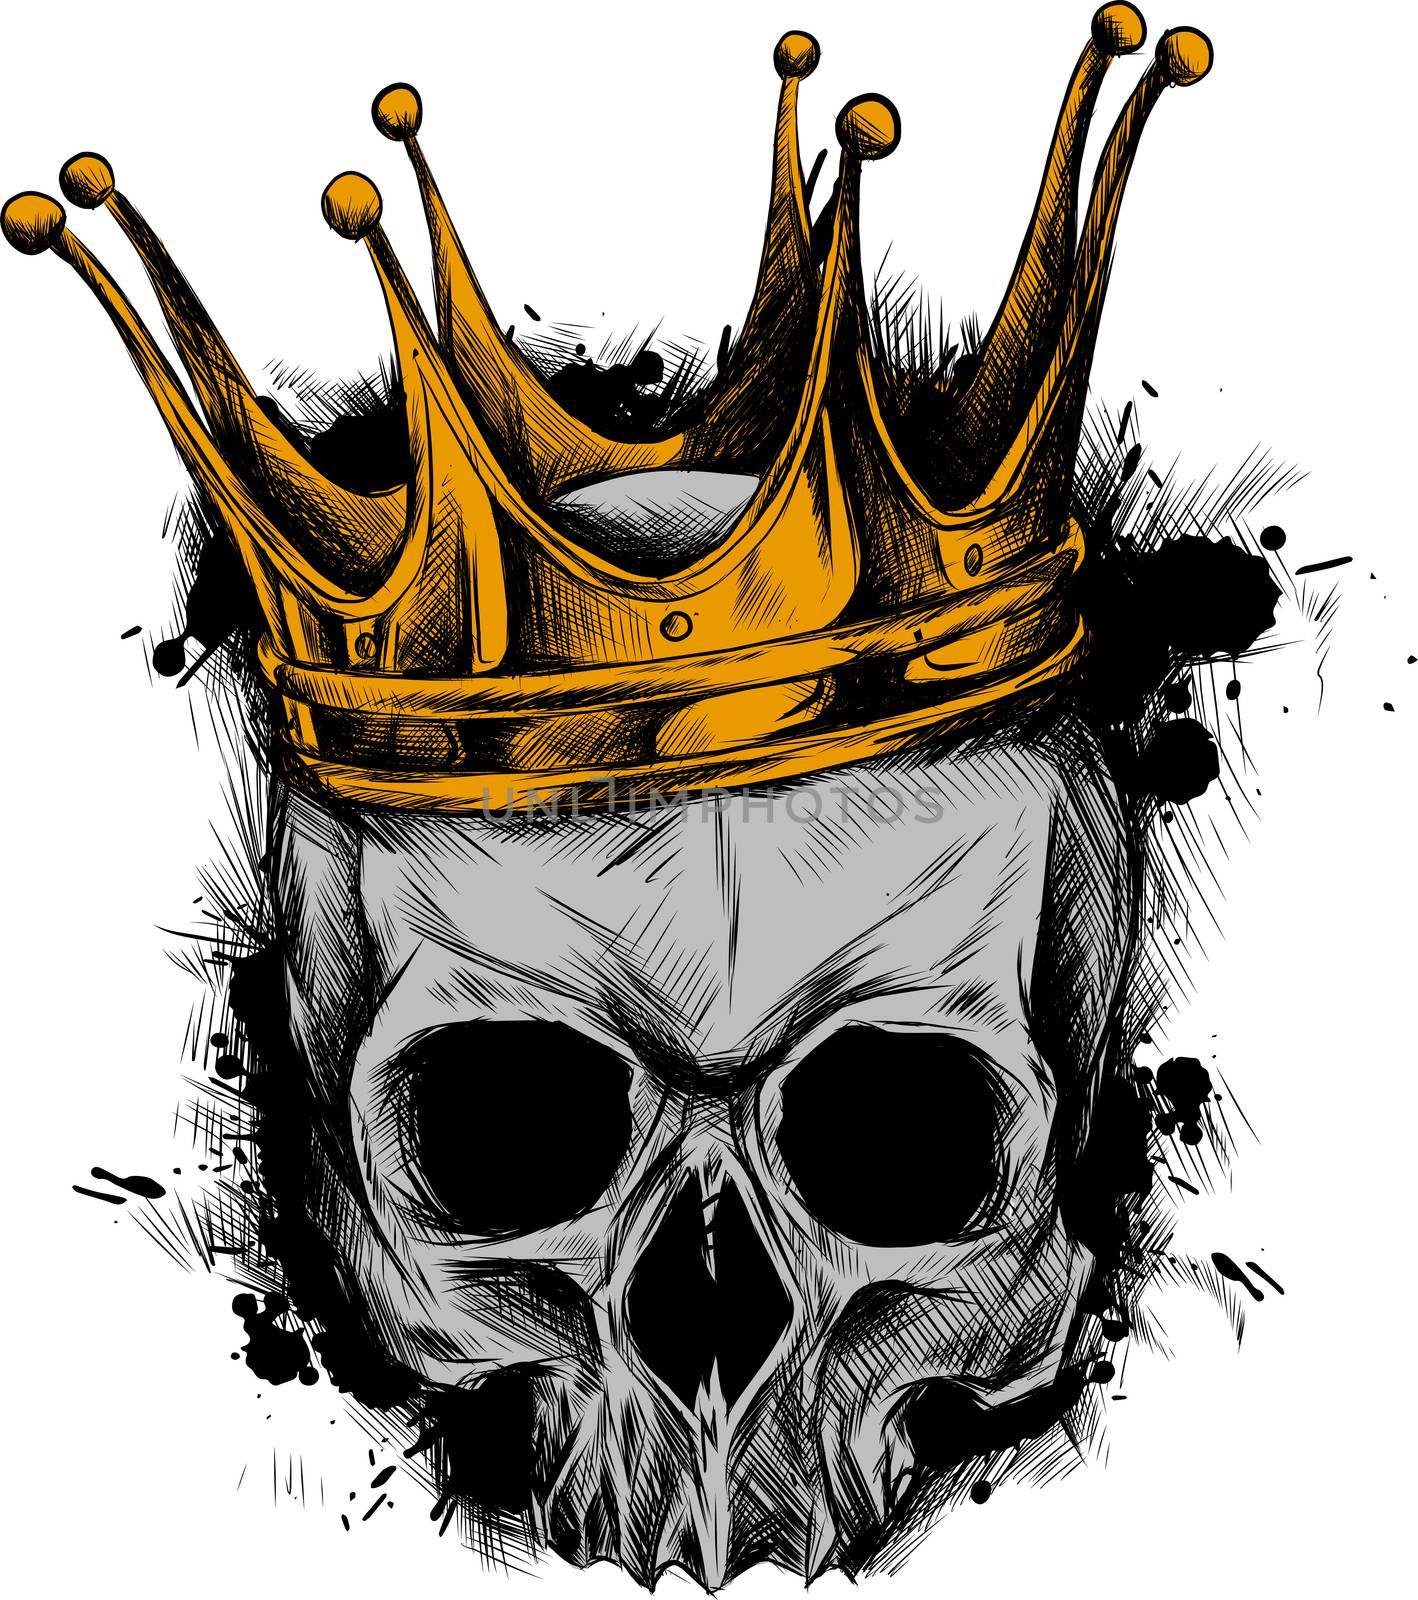 Illustration of black and white skull in crown with beard isolated on white background by dean